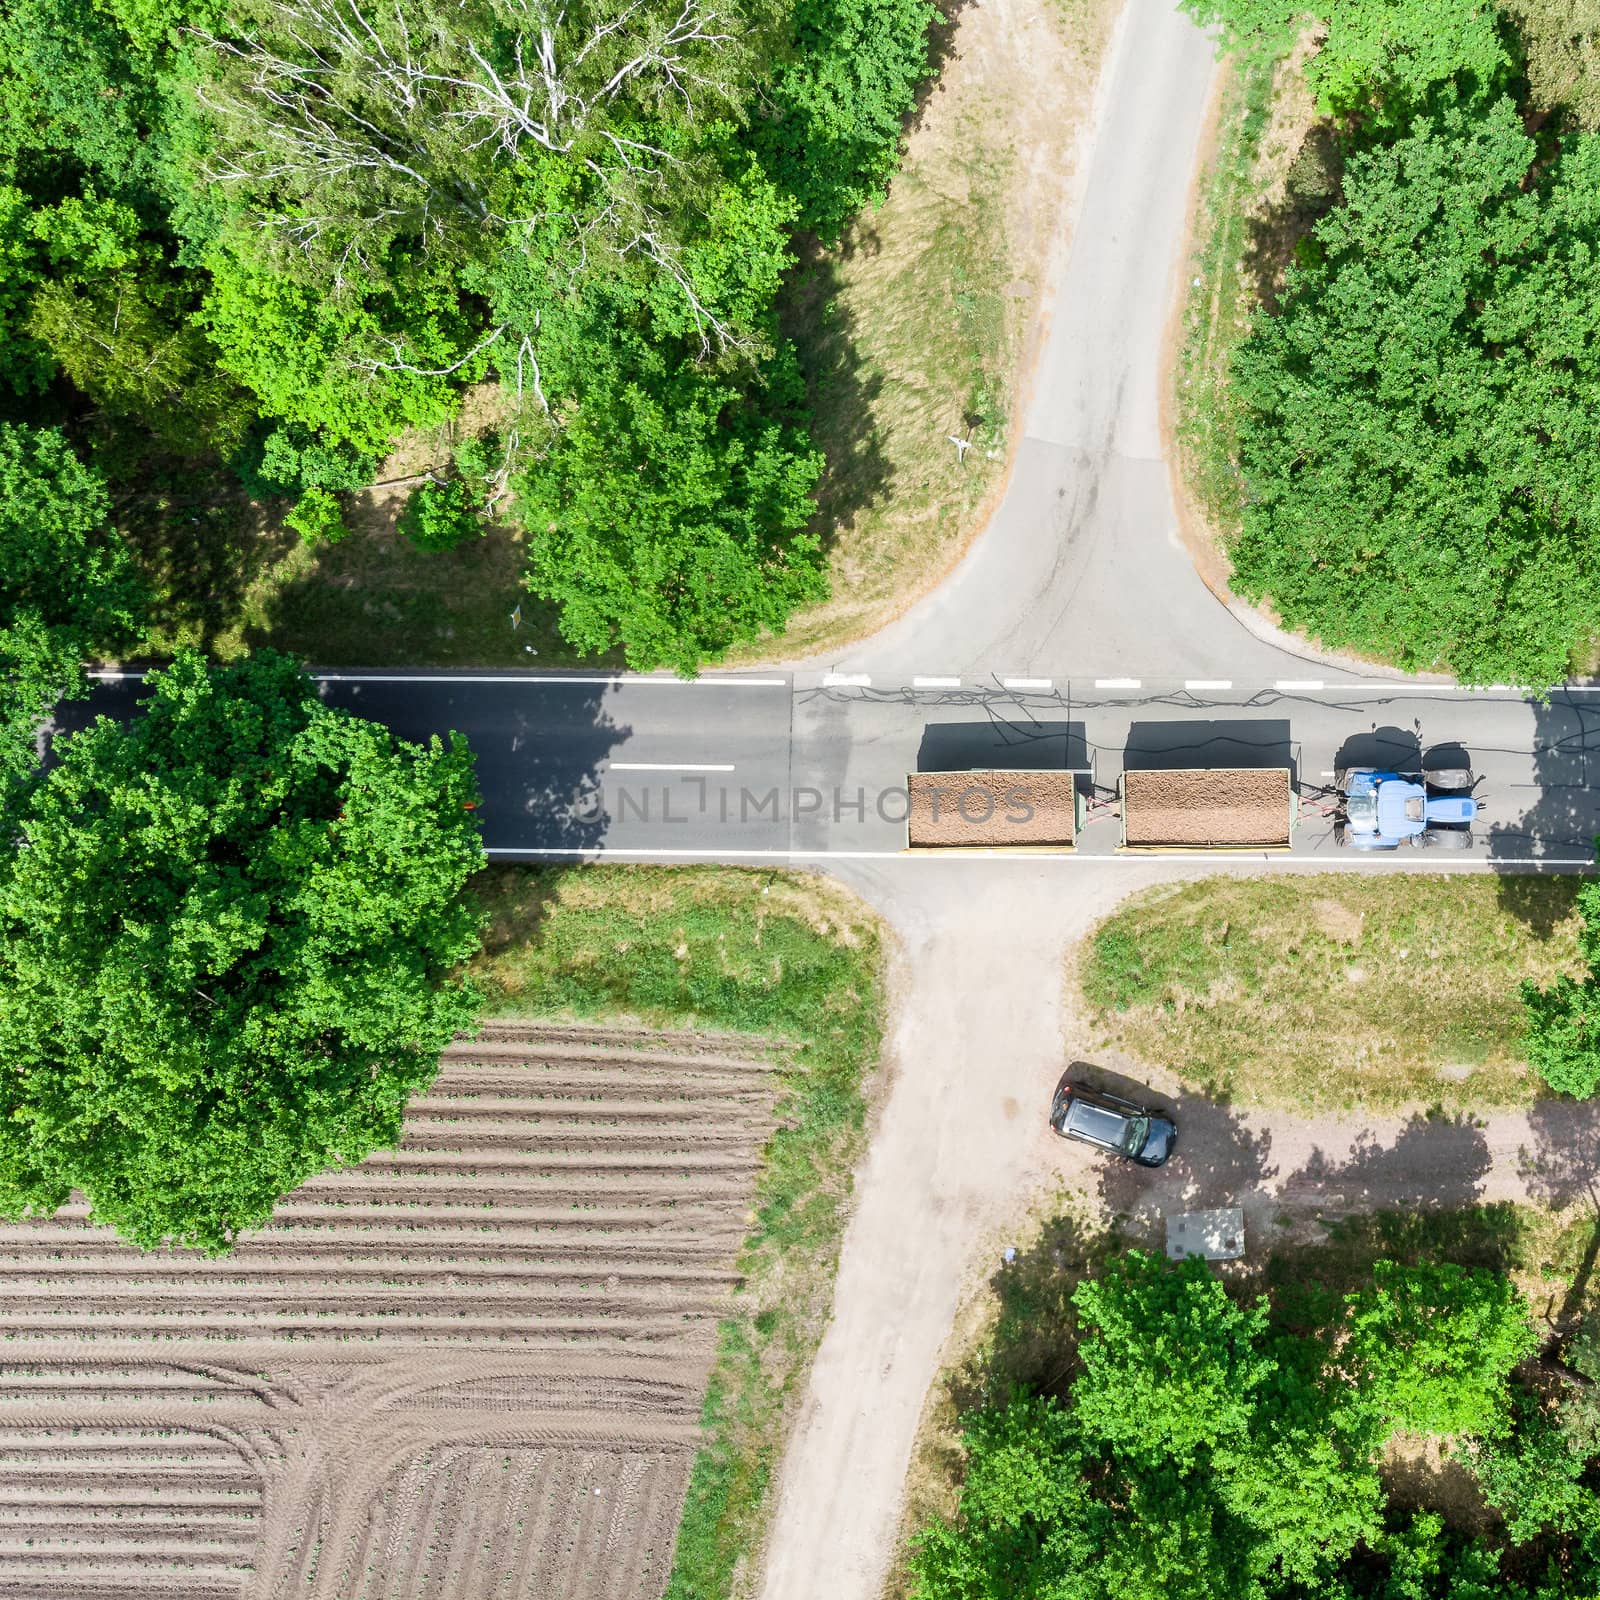 Aerial photo of a crossing in Germany near Celle over which a tractor with two loaded trailers drives, made with drone